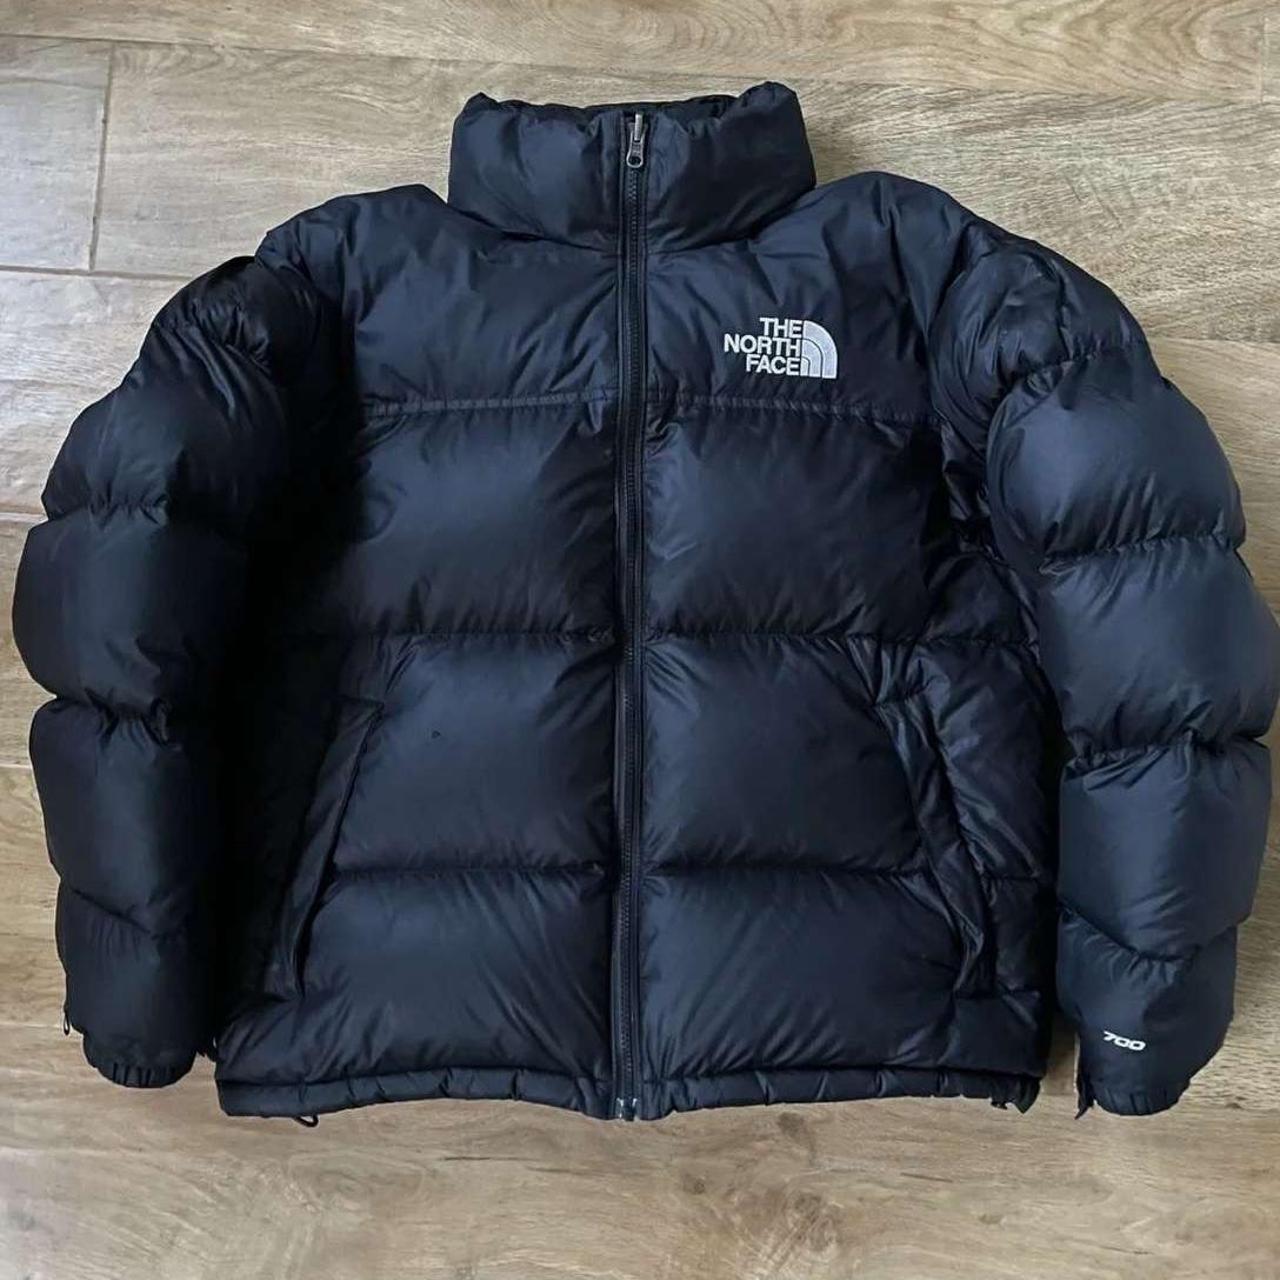 Brand new mint condition vintage north face - Depop